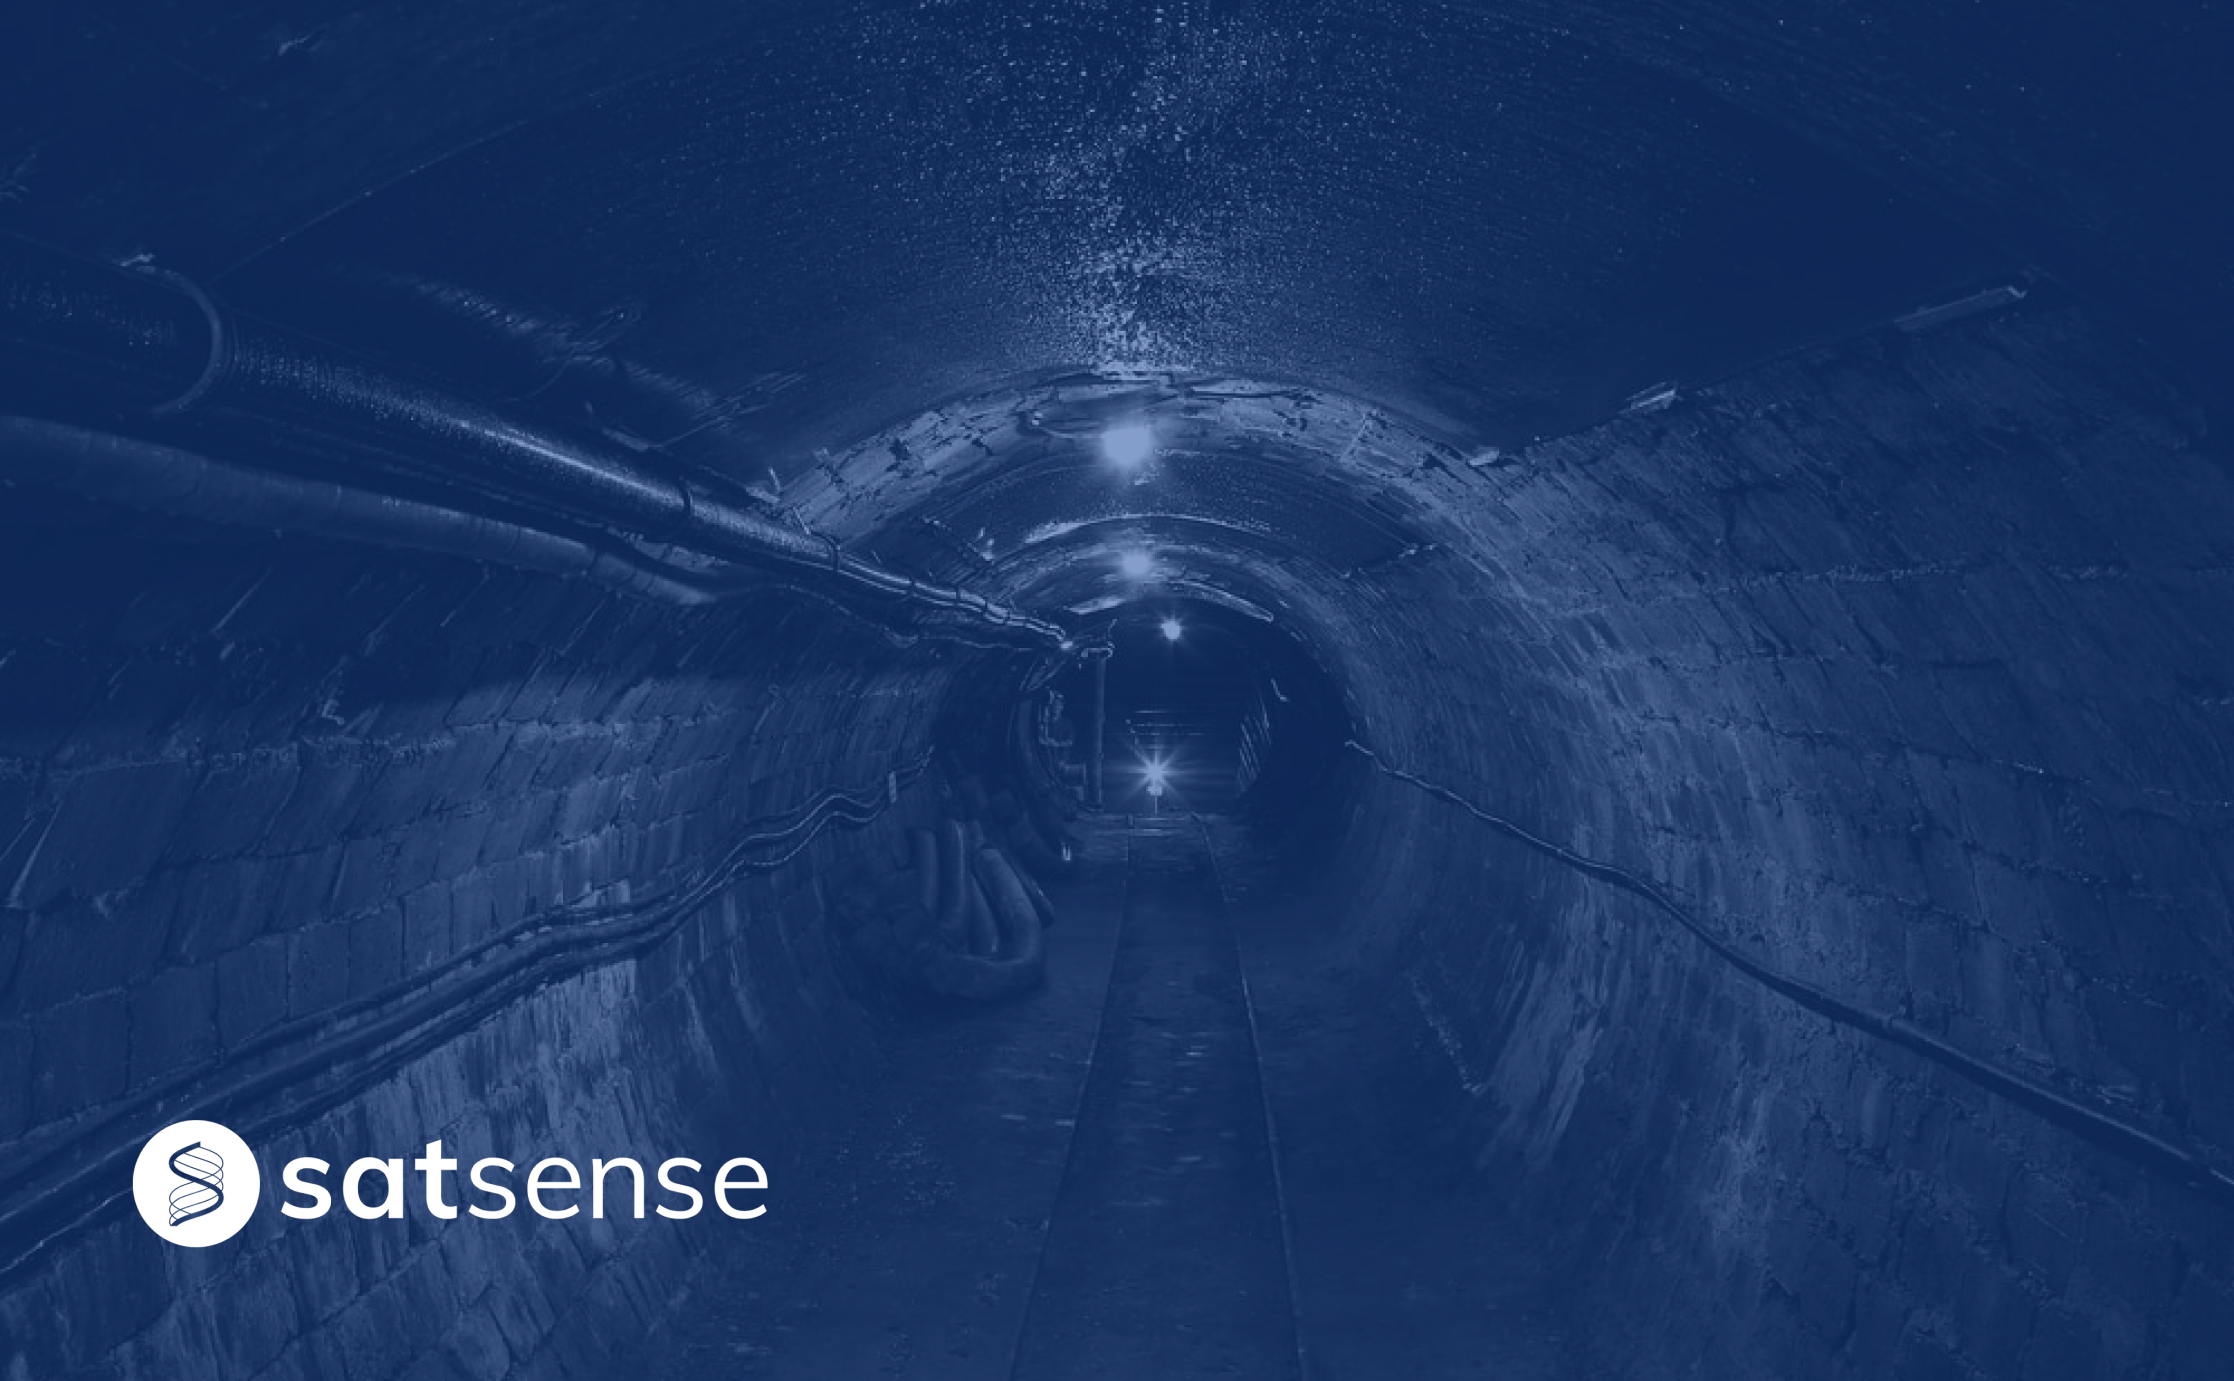 A tunnel with a SatSense logo on the bottom left corner